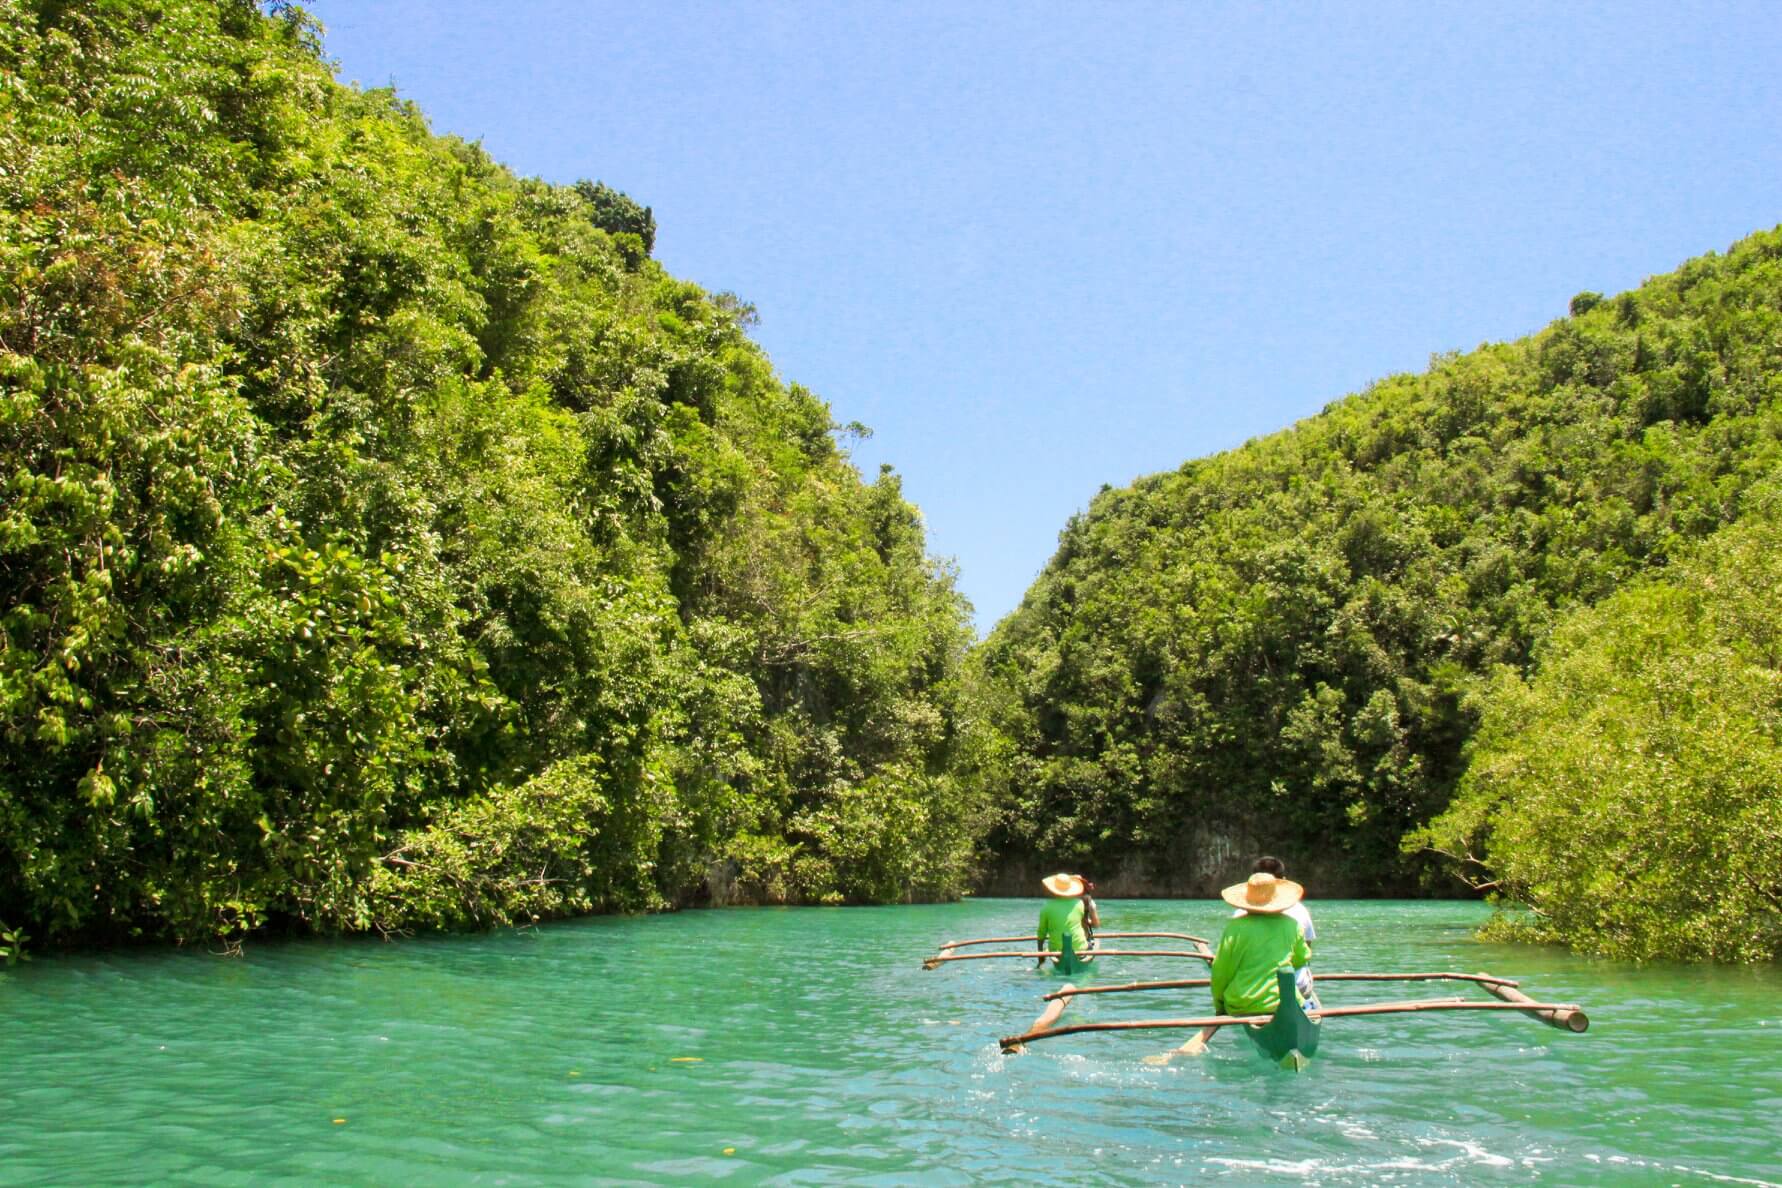 Bojo River is one of the award-winning Cebu tourist spots for sustainable tourism